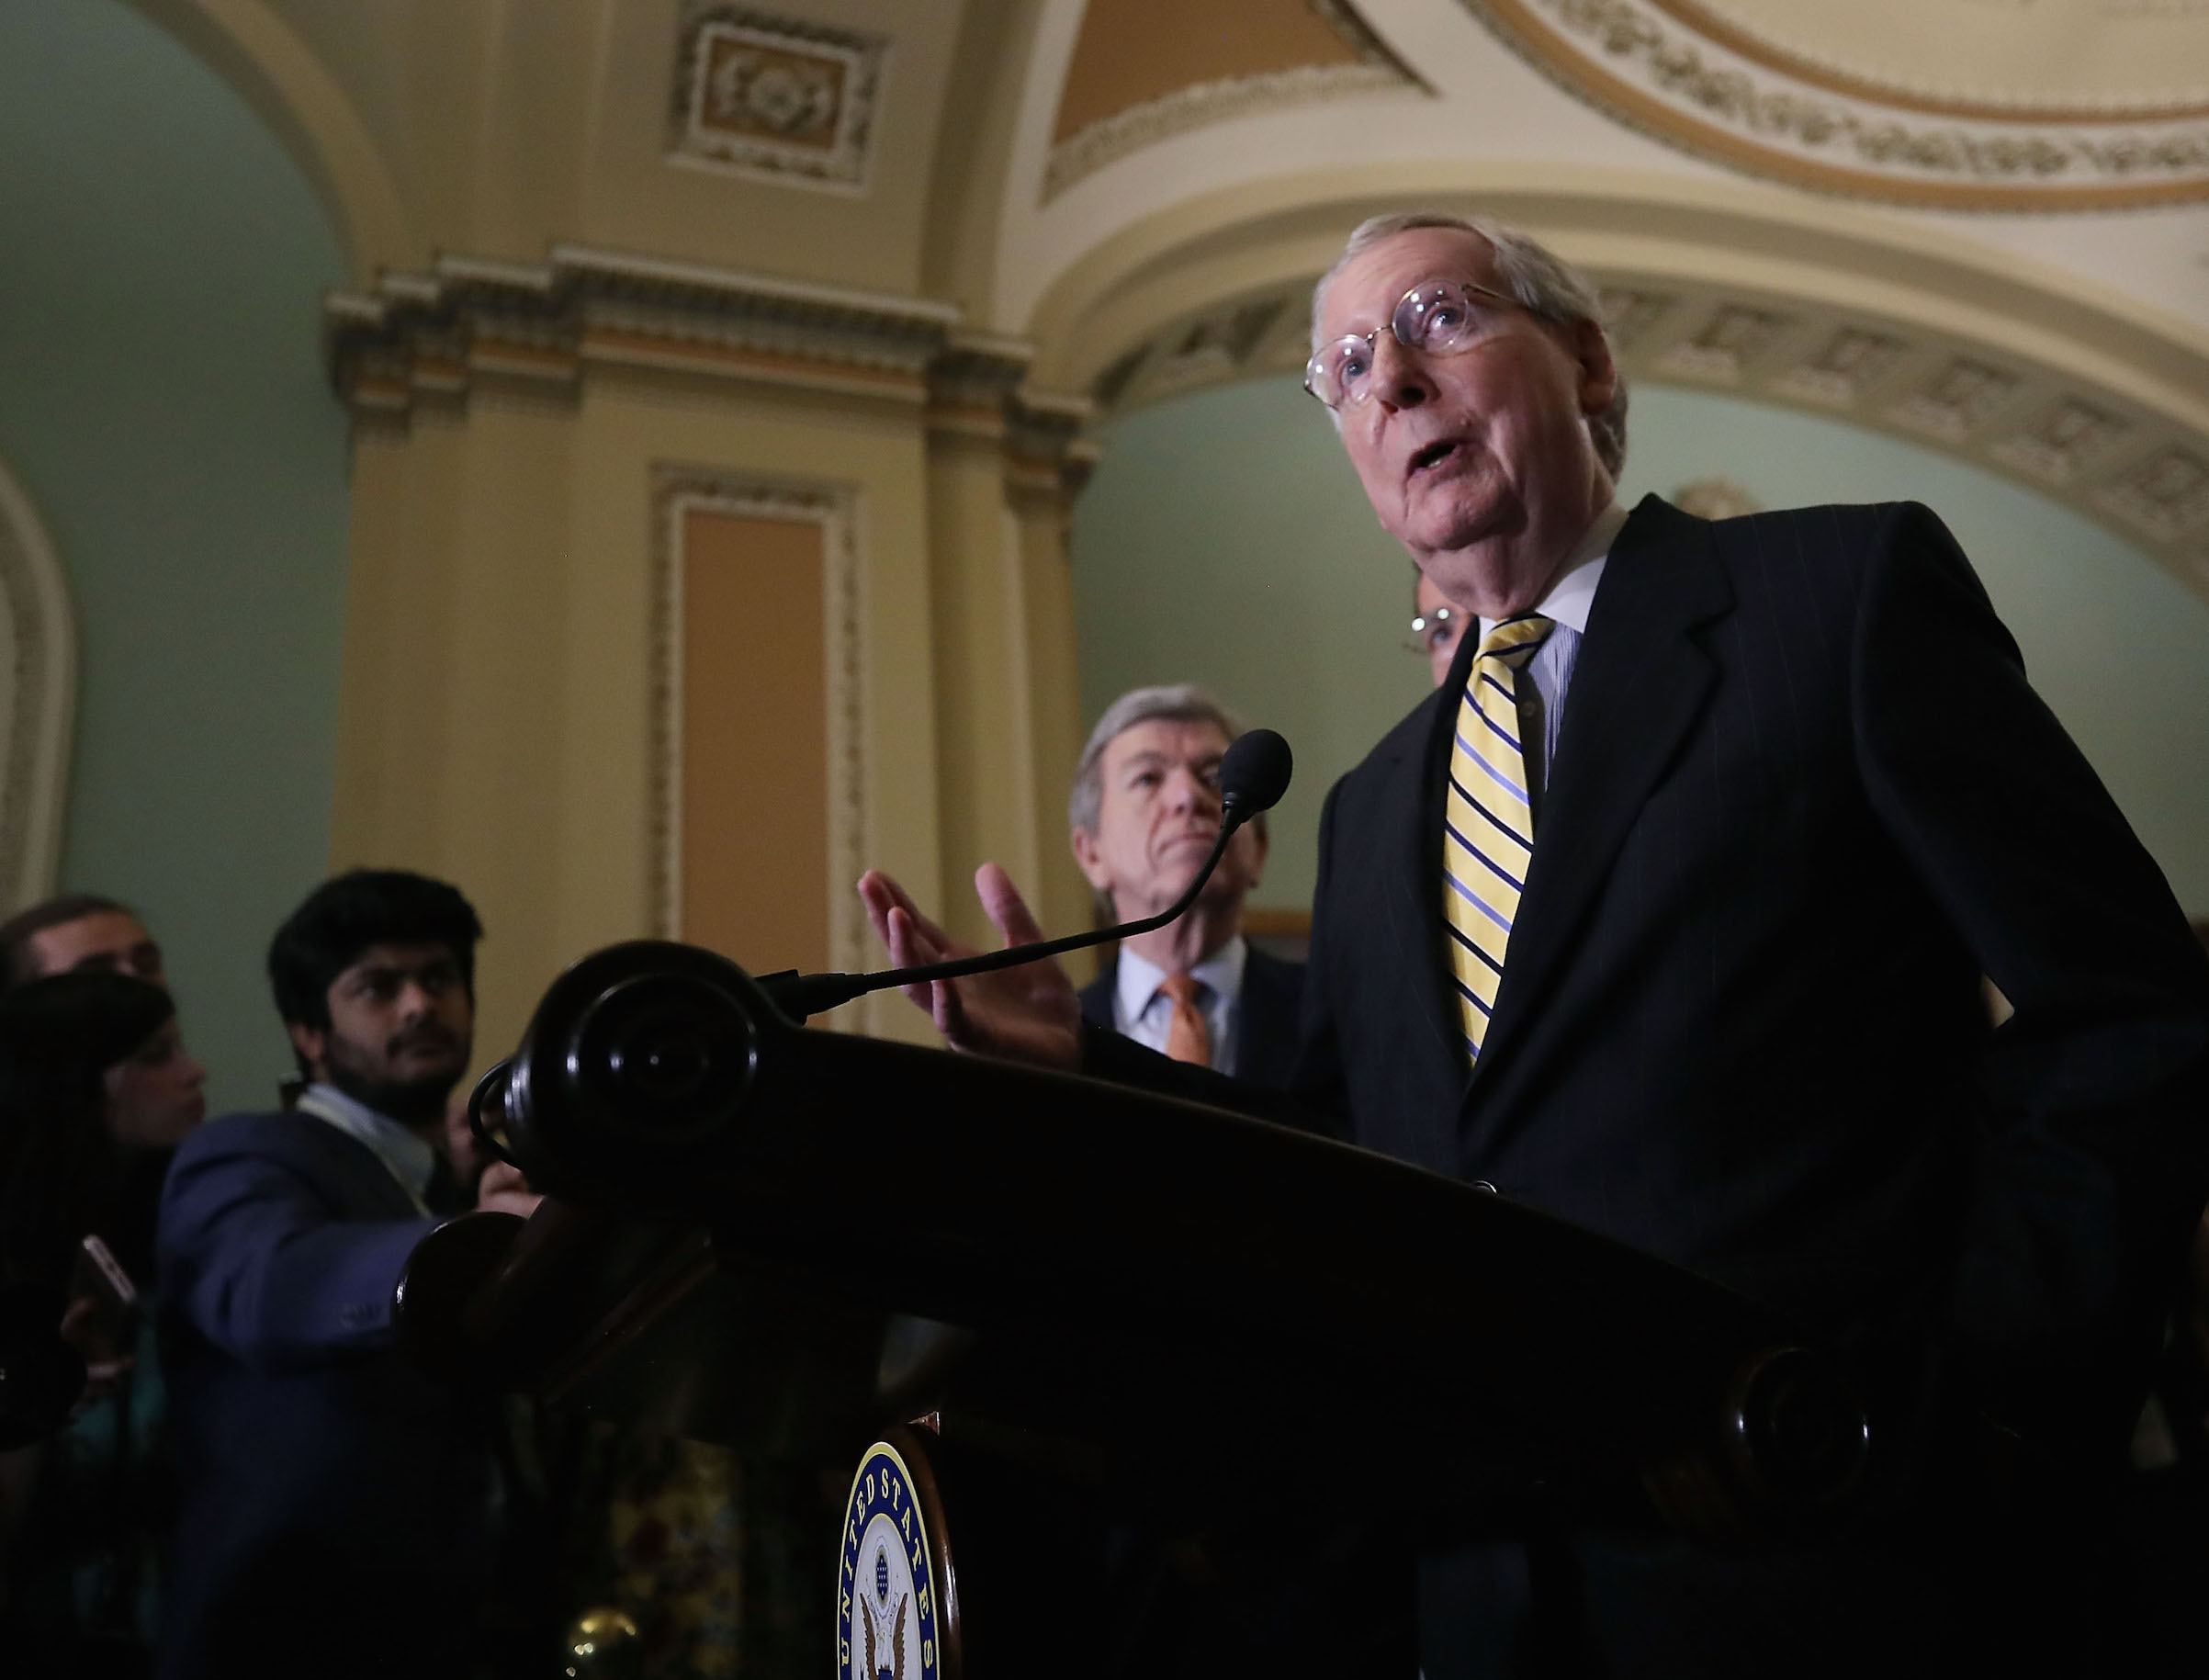 Senate Majority Leader Mitch McConnell (R-KY) speaks after attending the Senate Republican policy luncheon on June 5, 2018 in Washington, DC. McConnell announced that he had canceled the Senate's August recess. (Mark Wilson—Getty Images)